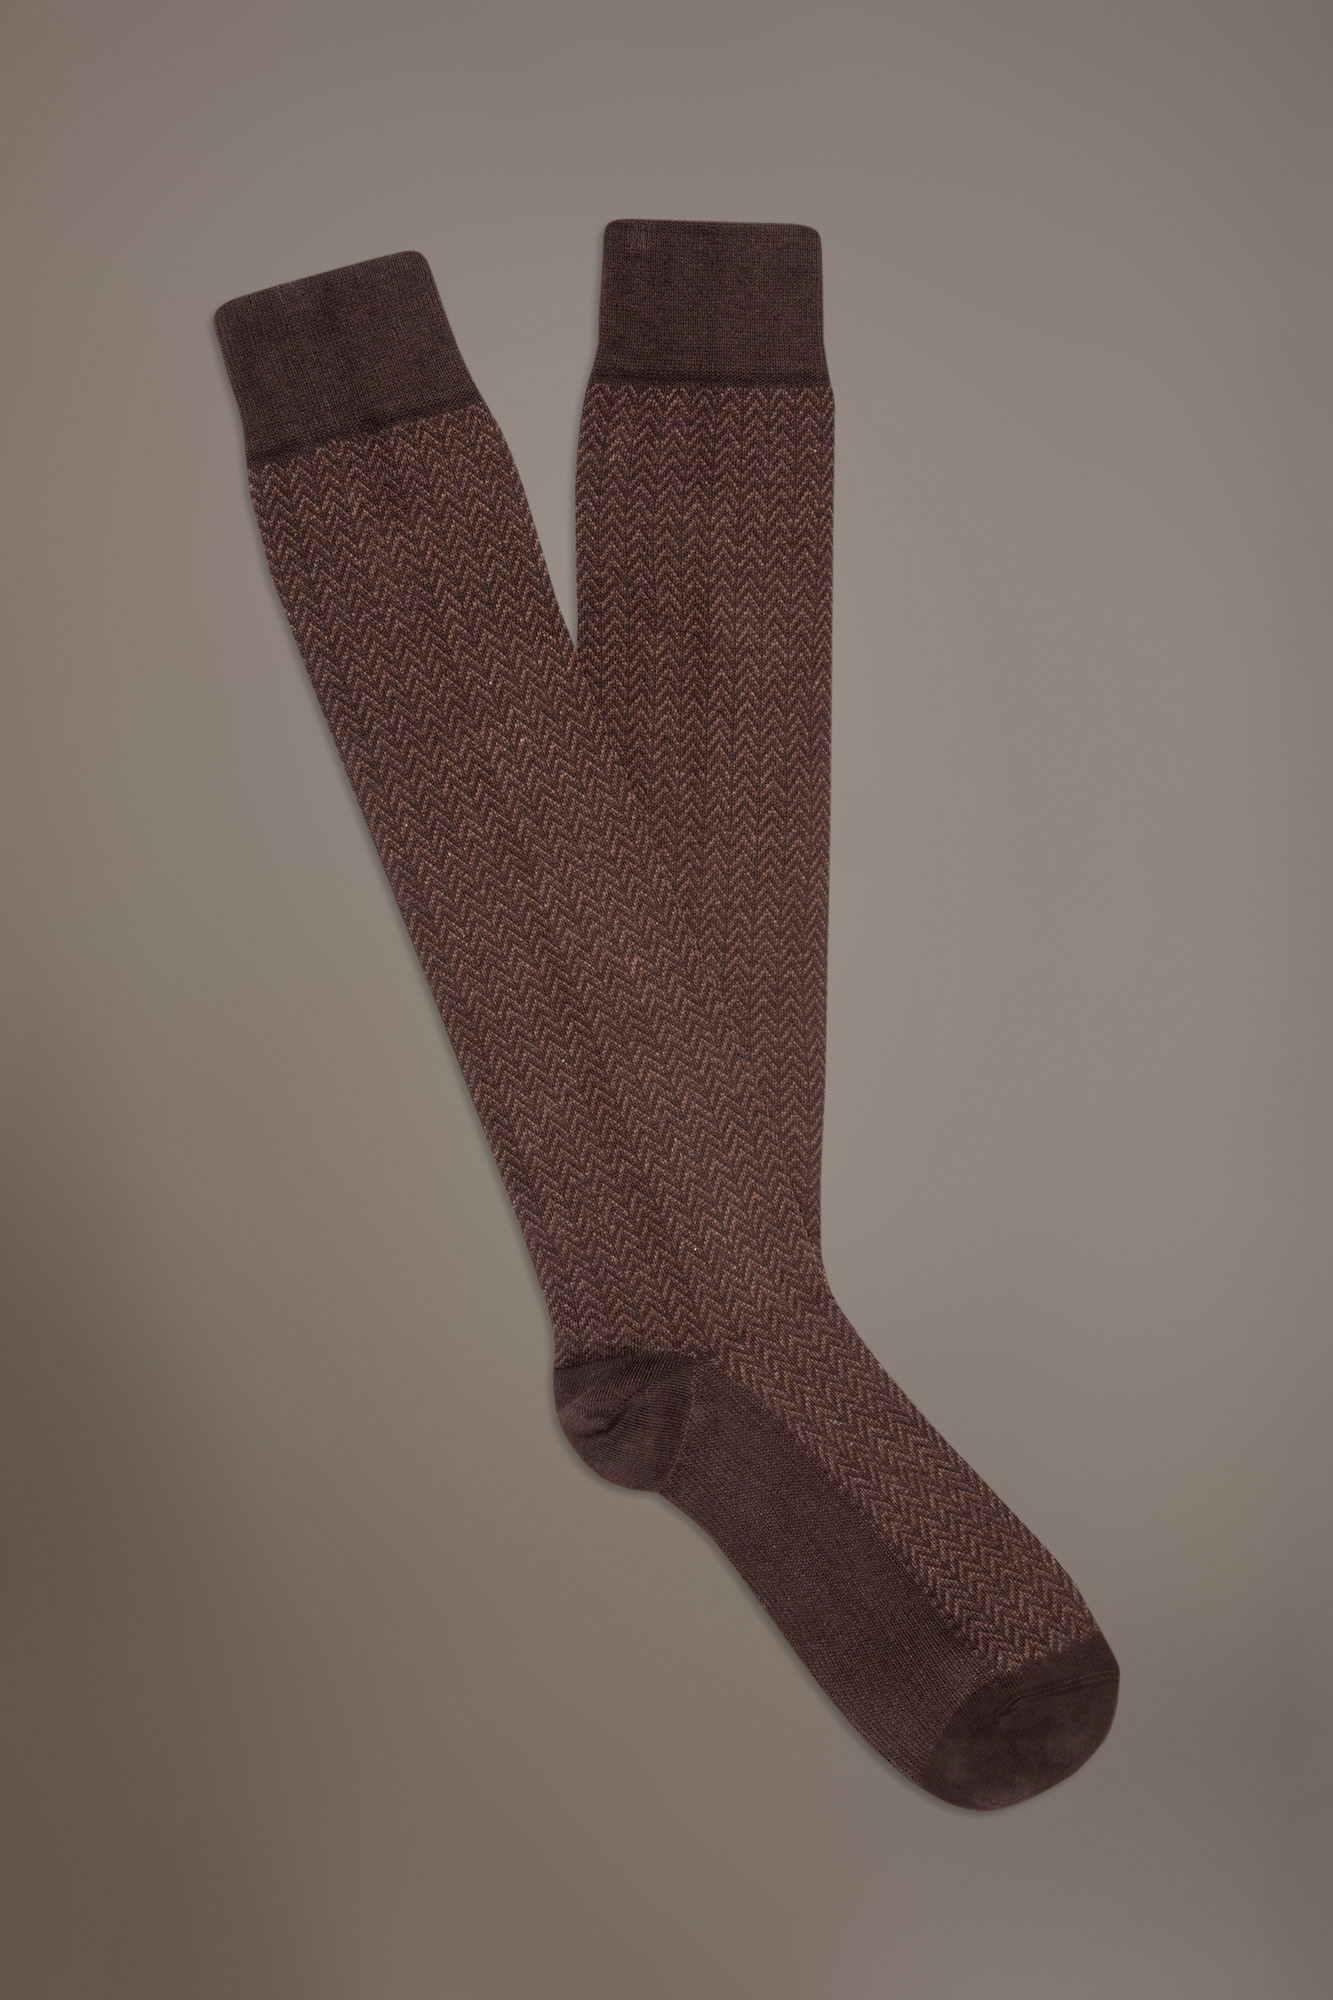 Long socks in stockinette stitch made in Italy